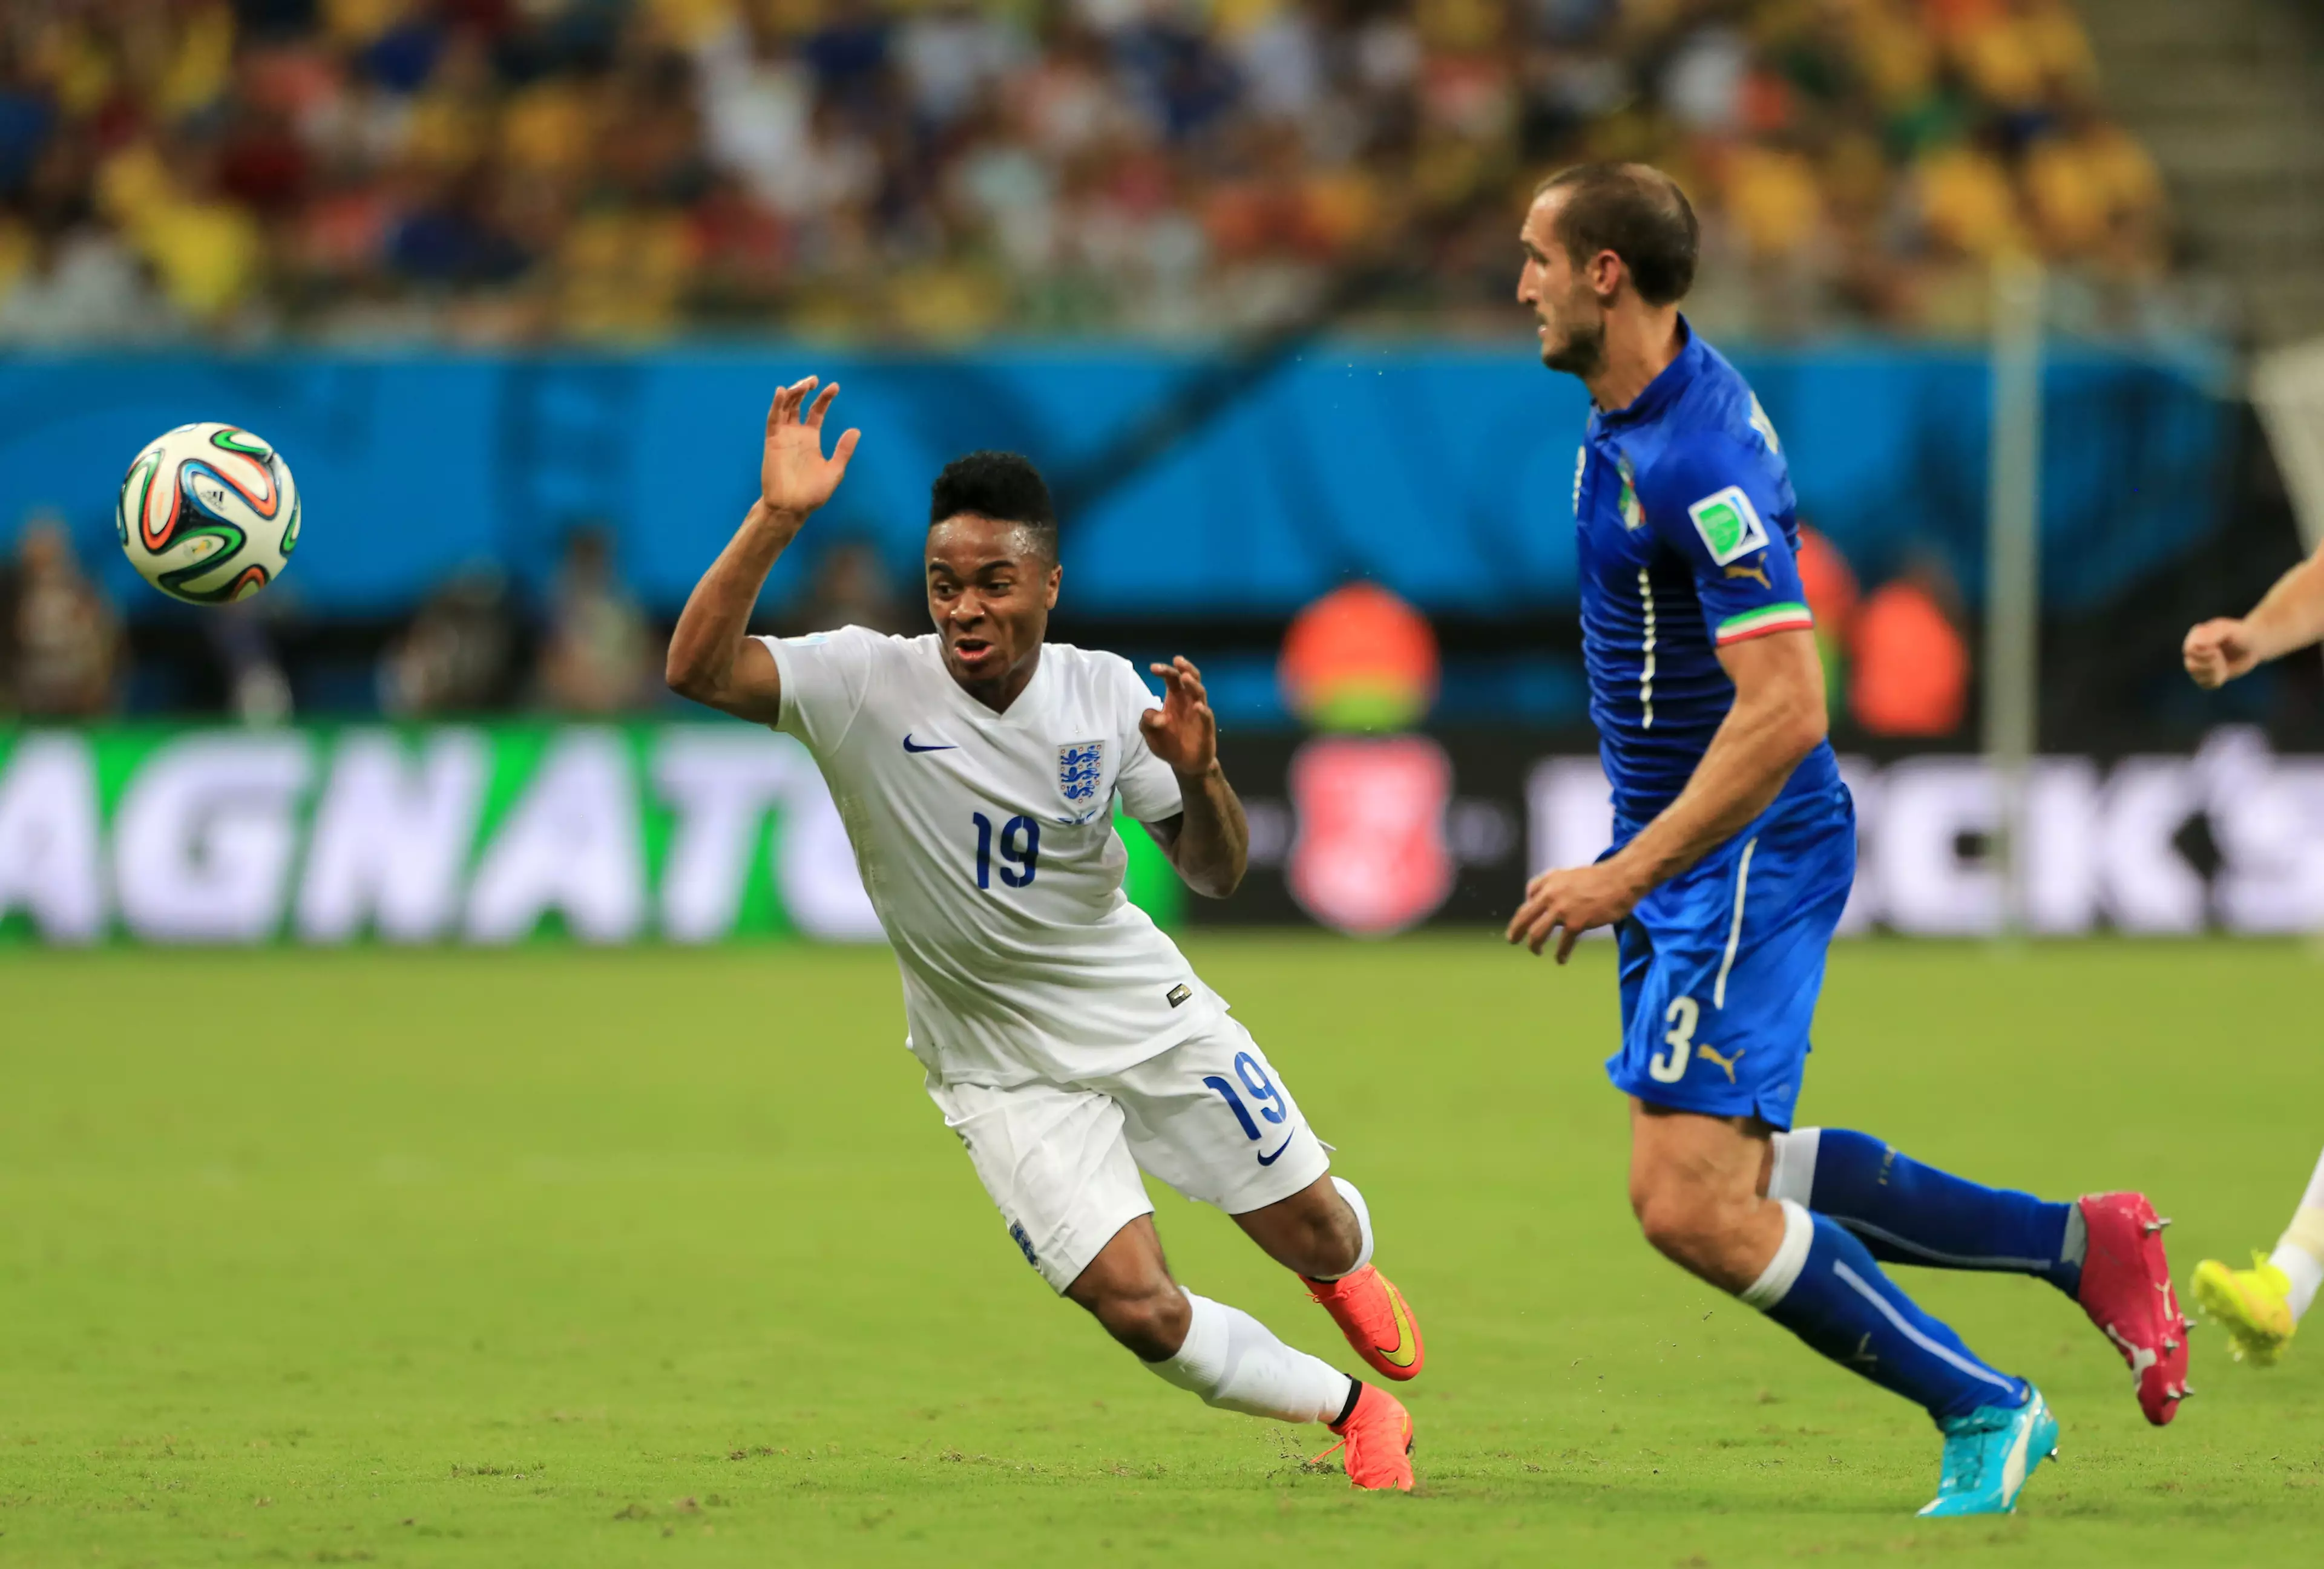 Sterling and Chiellini will meet again on Sunday. Image: PA Images